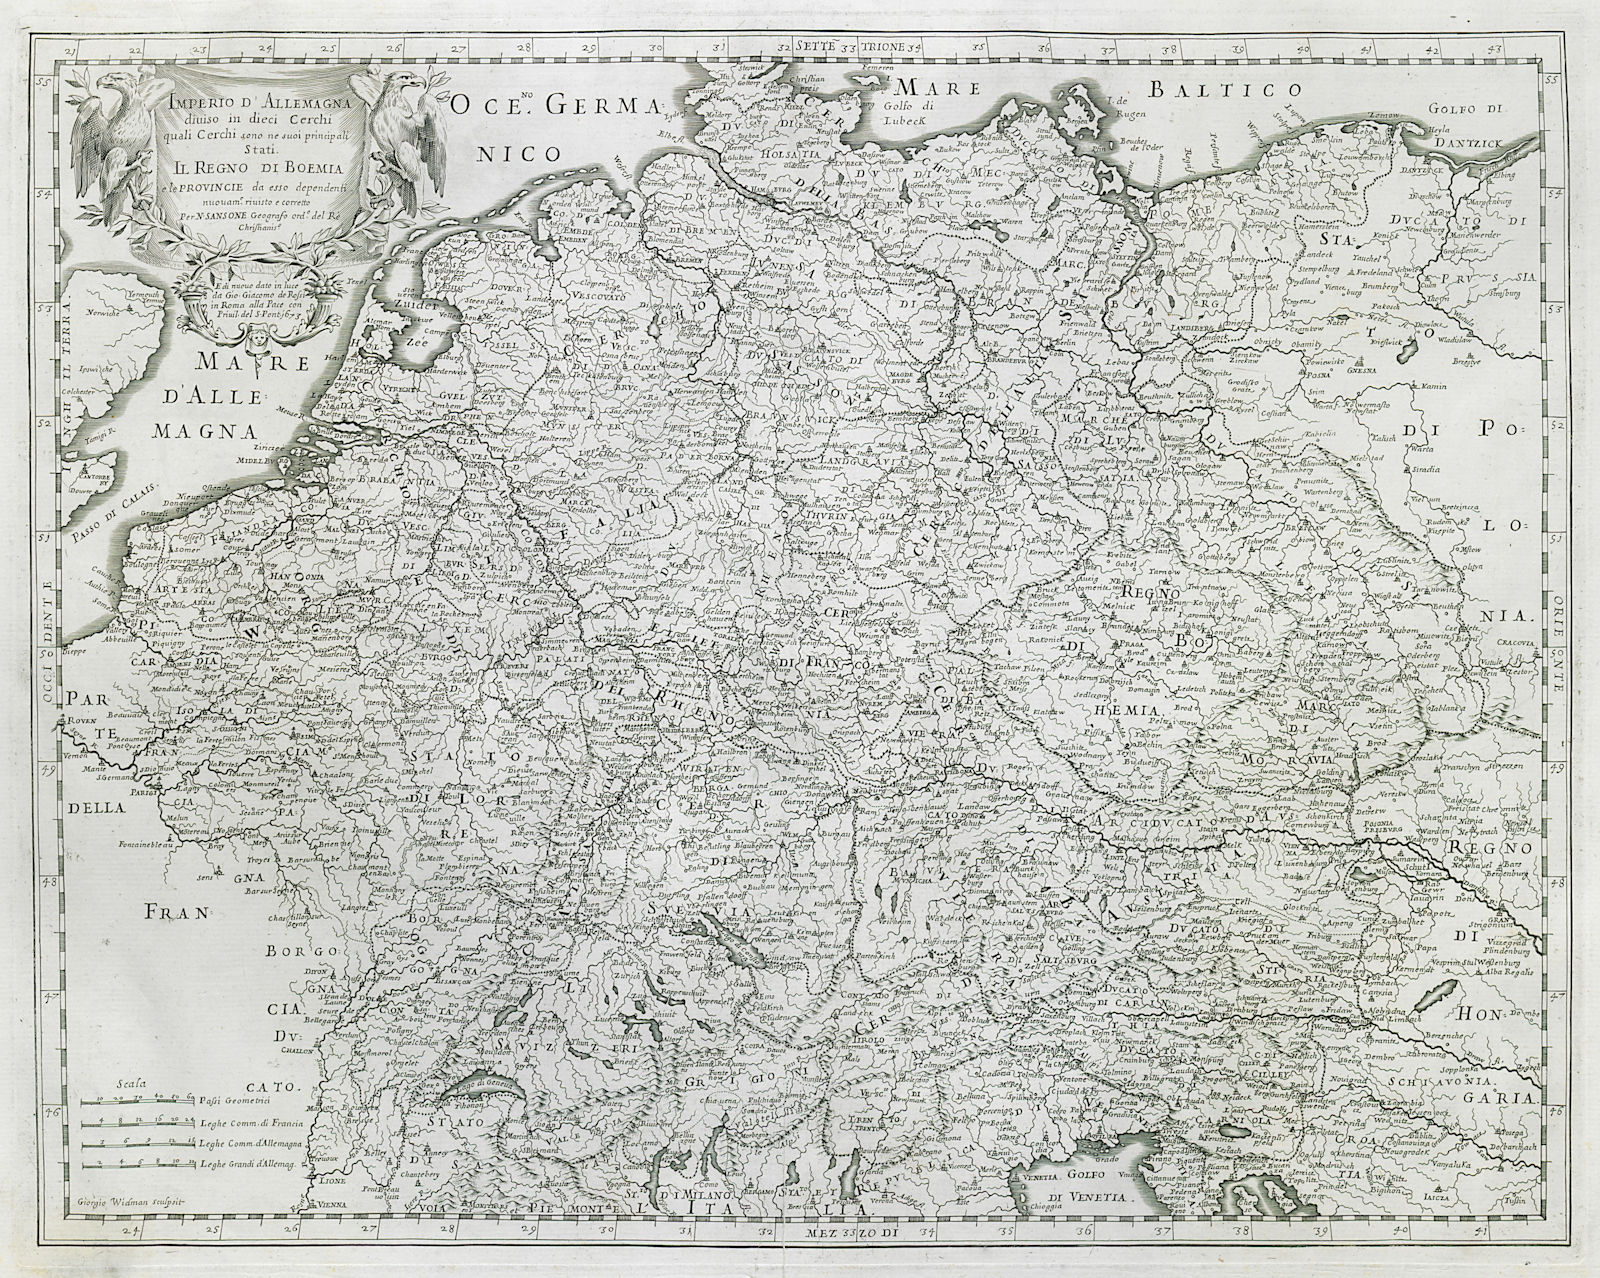 Associate Product Imperio d'Allemagna… Holy Roman Empire. Germany & Central Europe. ROSSI 1673 map